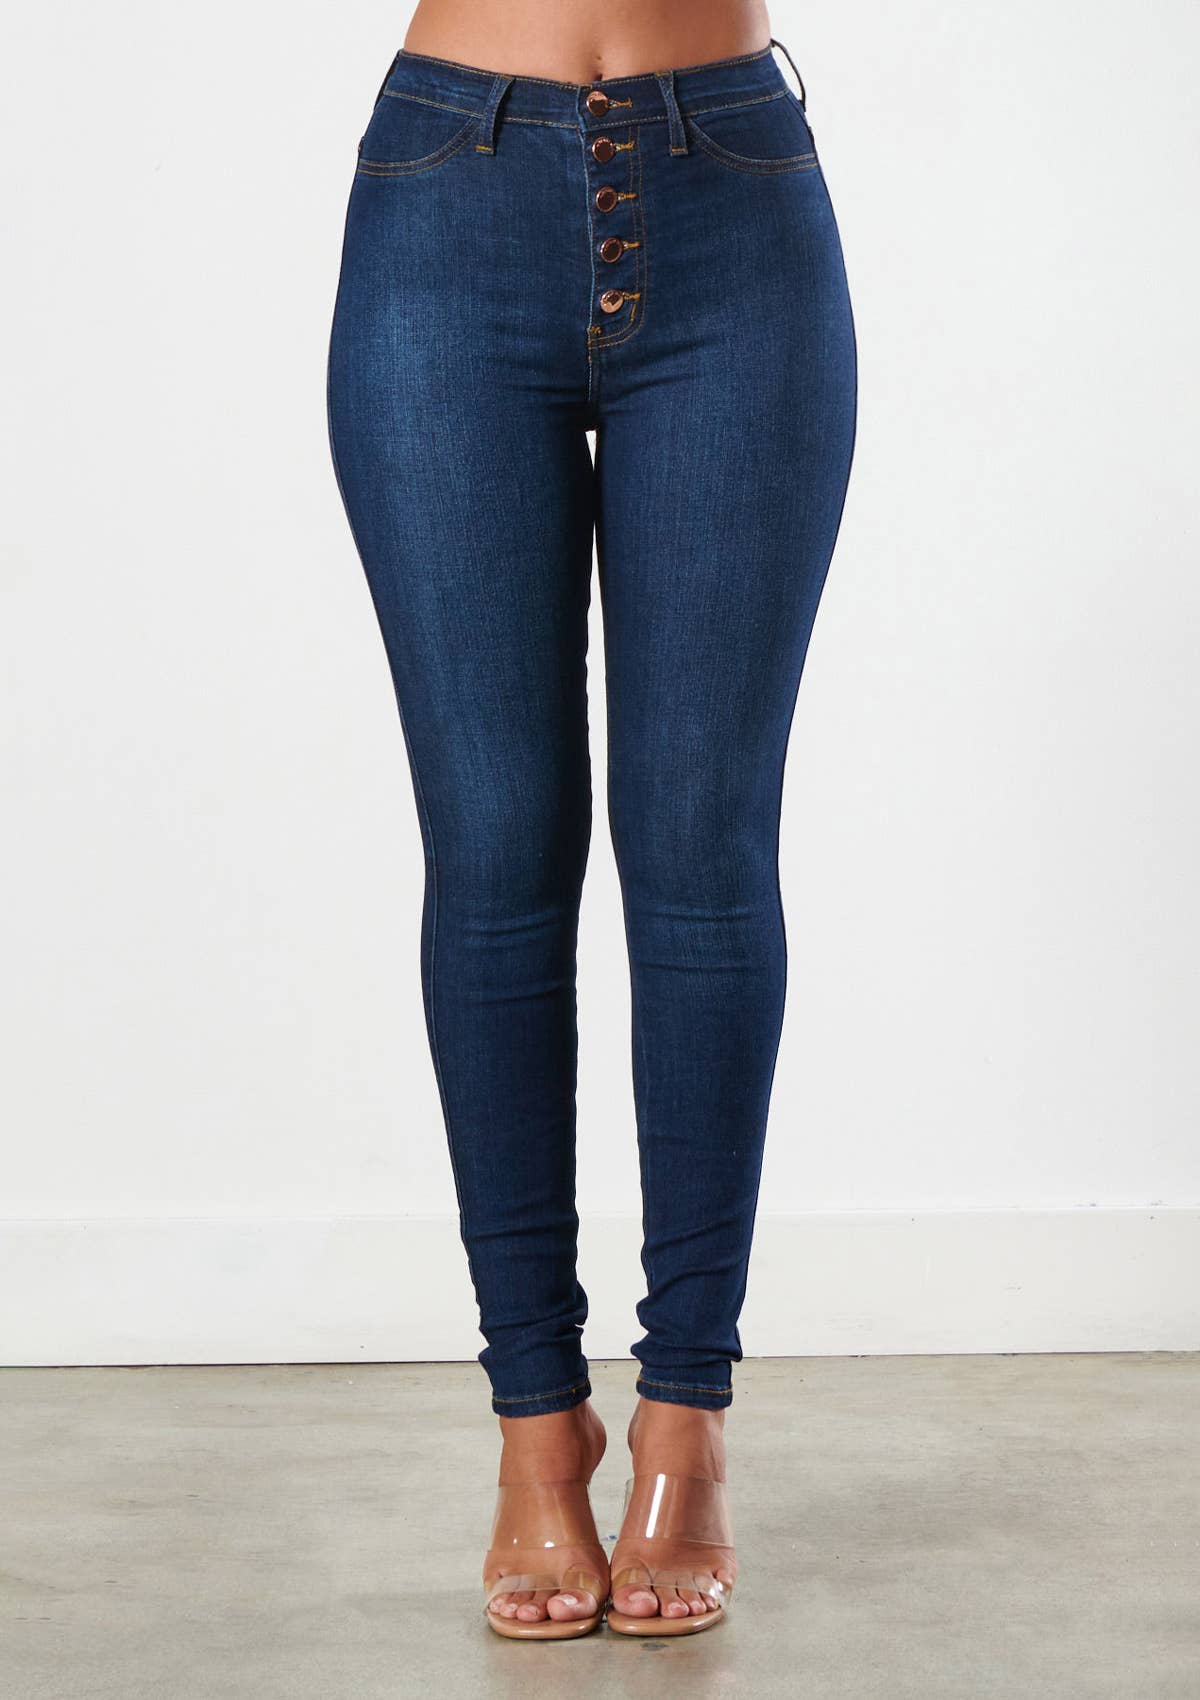 Crafted with expert precision, our High Five Skinny Jeans offer a flattering high-waisted fit and sleek skinny style. The 5 button design adds a touch of unique detail. Experience confident comfort and effortless style with these must-have jeans.